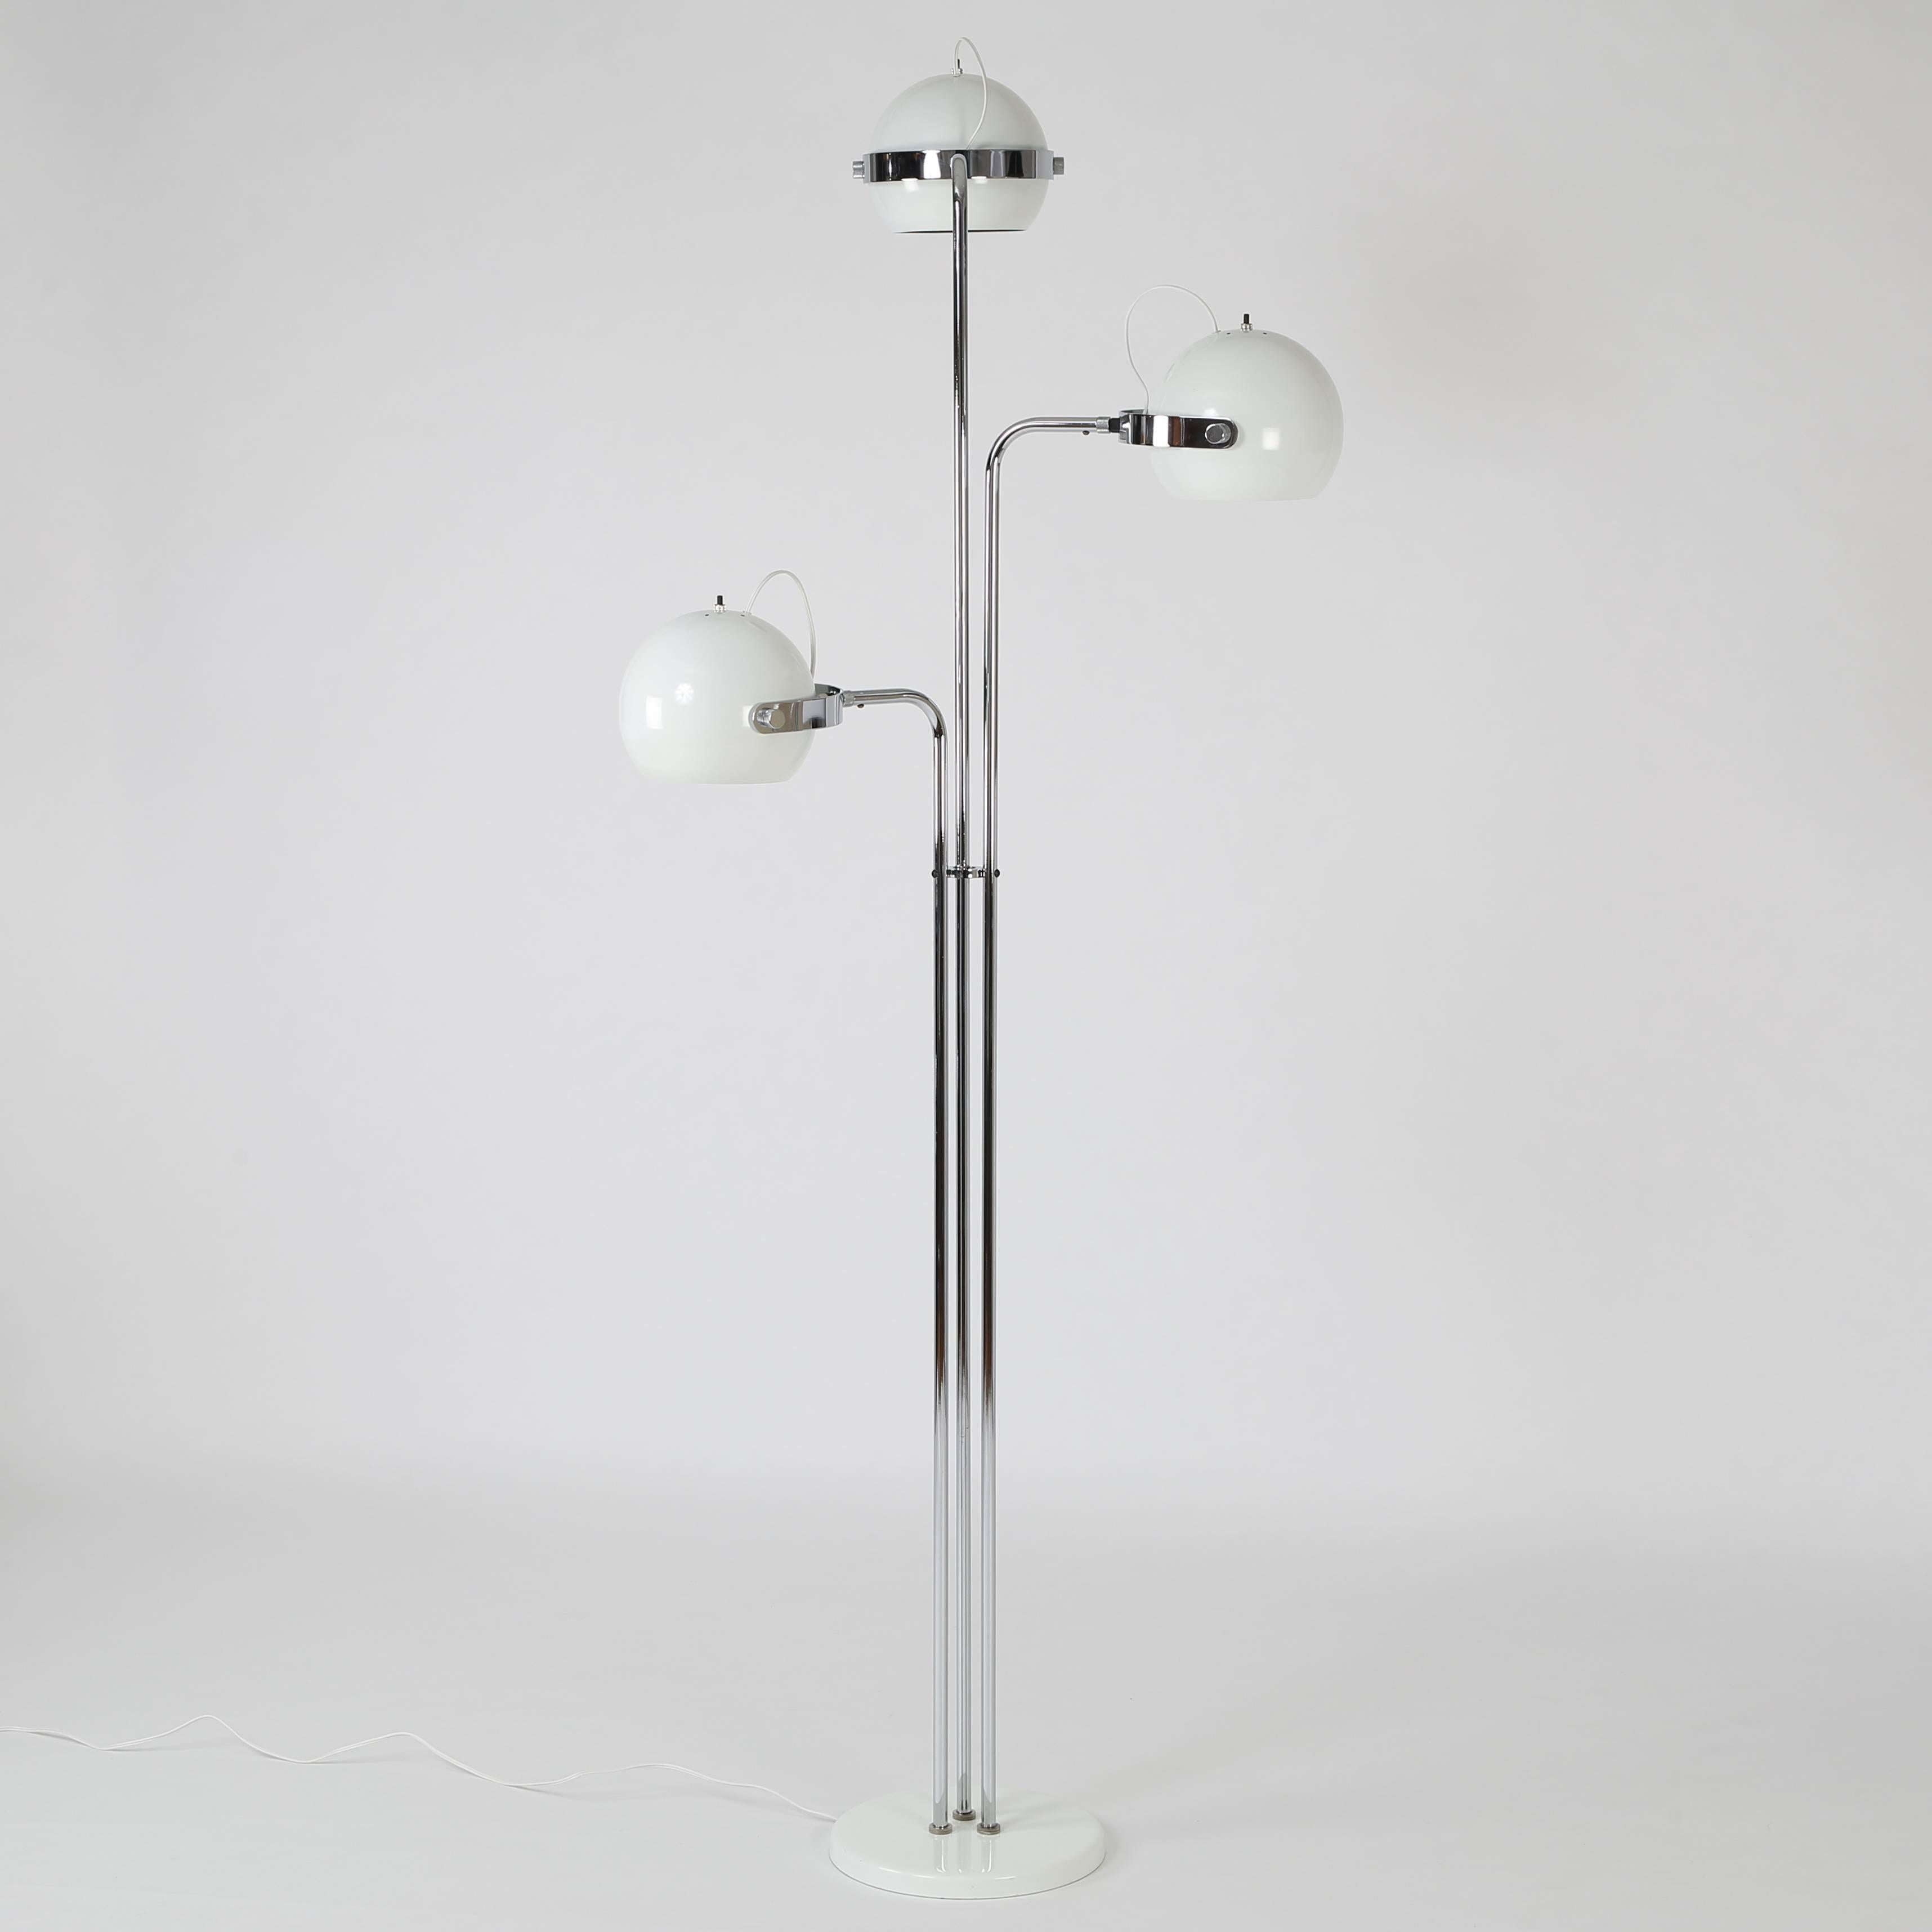 This rare and striking space-age floor lamp by American lighting designer Robert Sonneman features three white-enamel spherical shades that rotate and swivel to cast light in any direction. Each head controlled by its own switch powering a